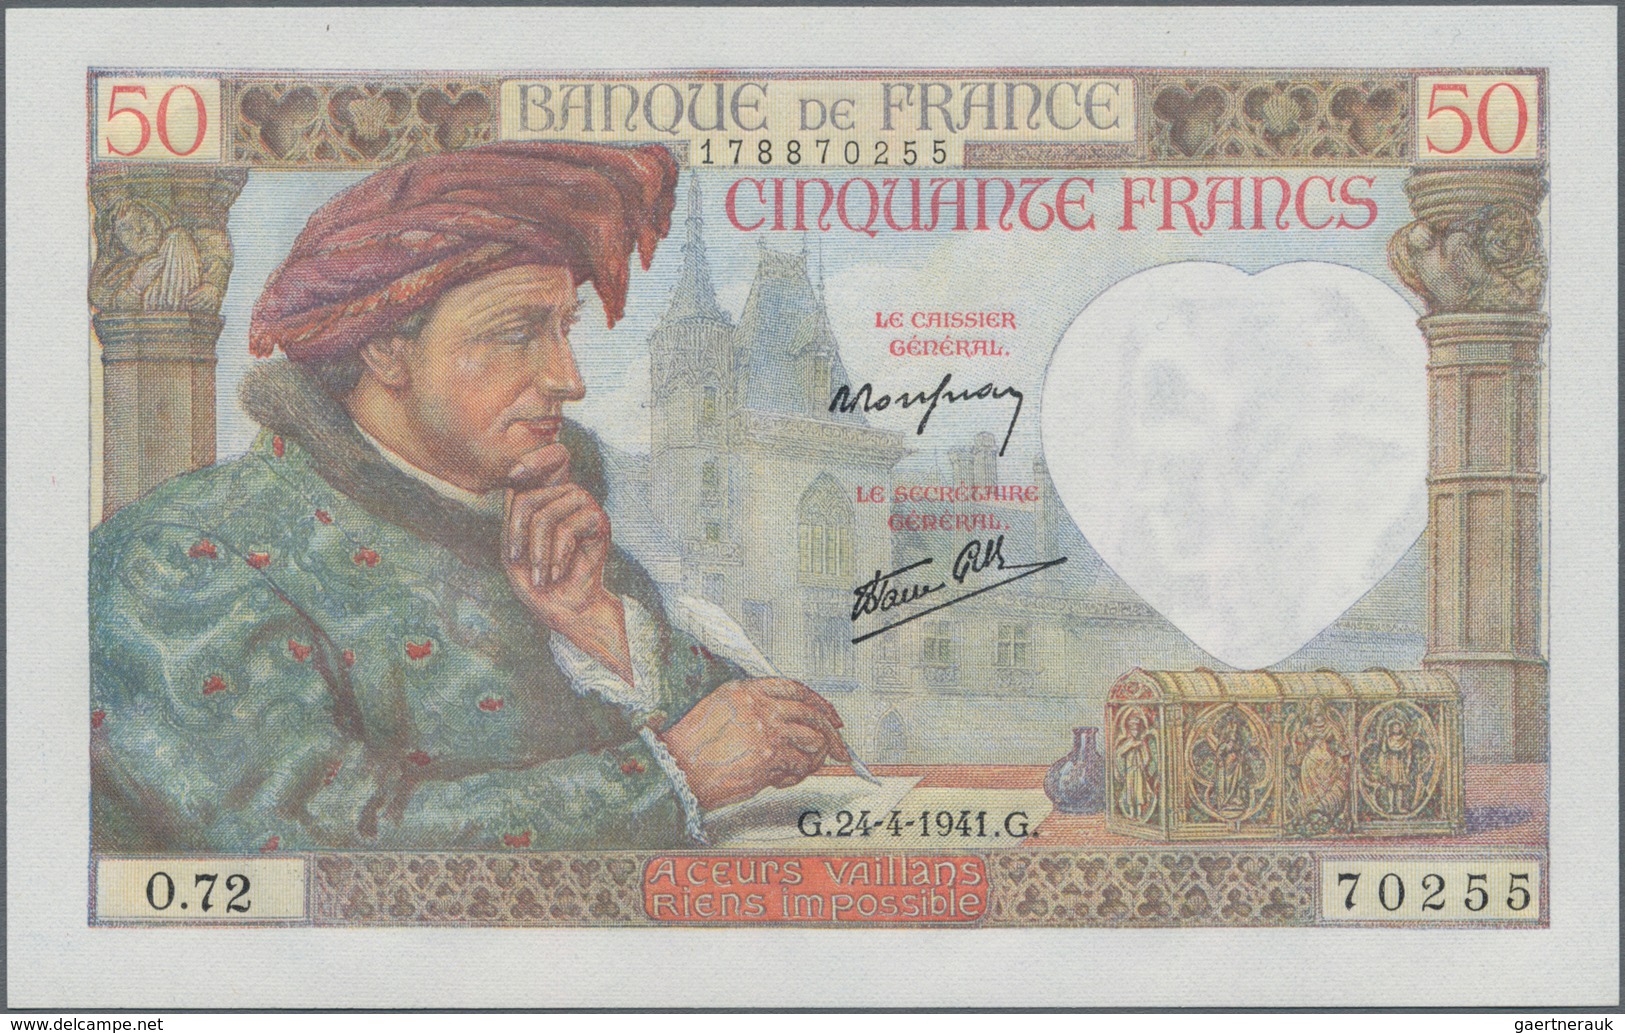 France / Frankreich: Banque de France nice lot with 10 banknotes 50 Francs 1941, P.93, some of them